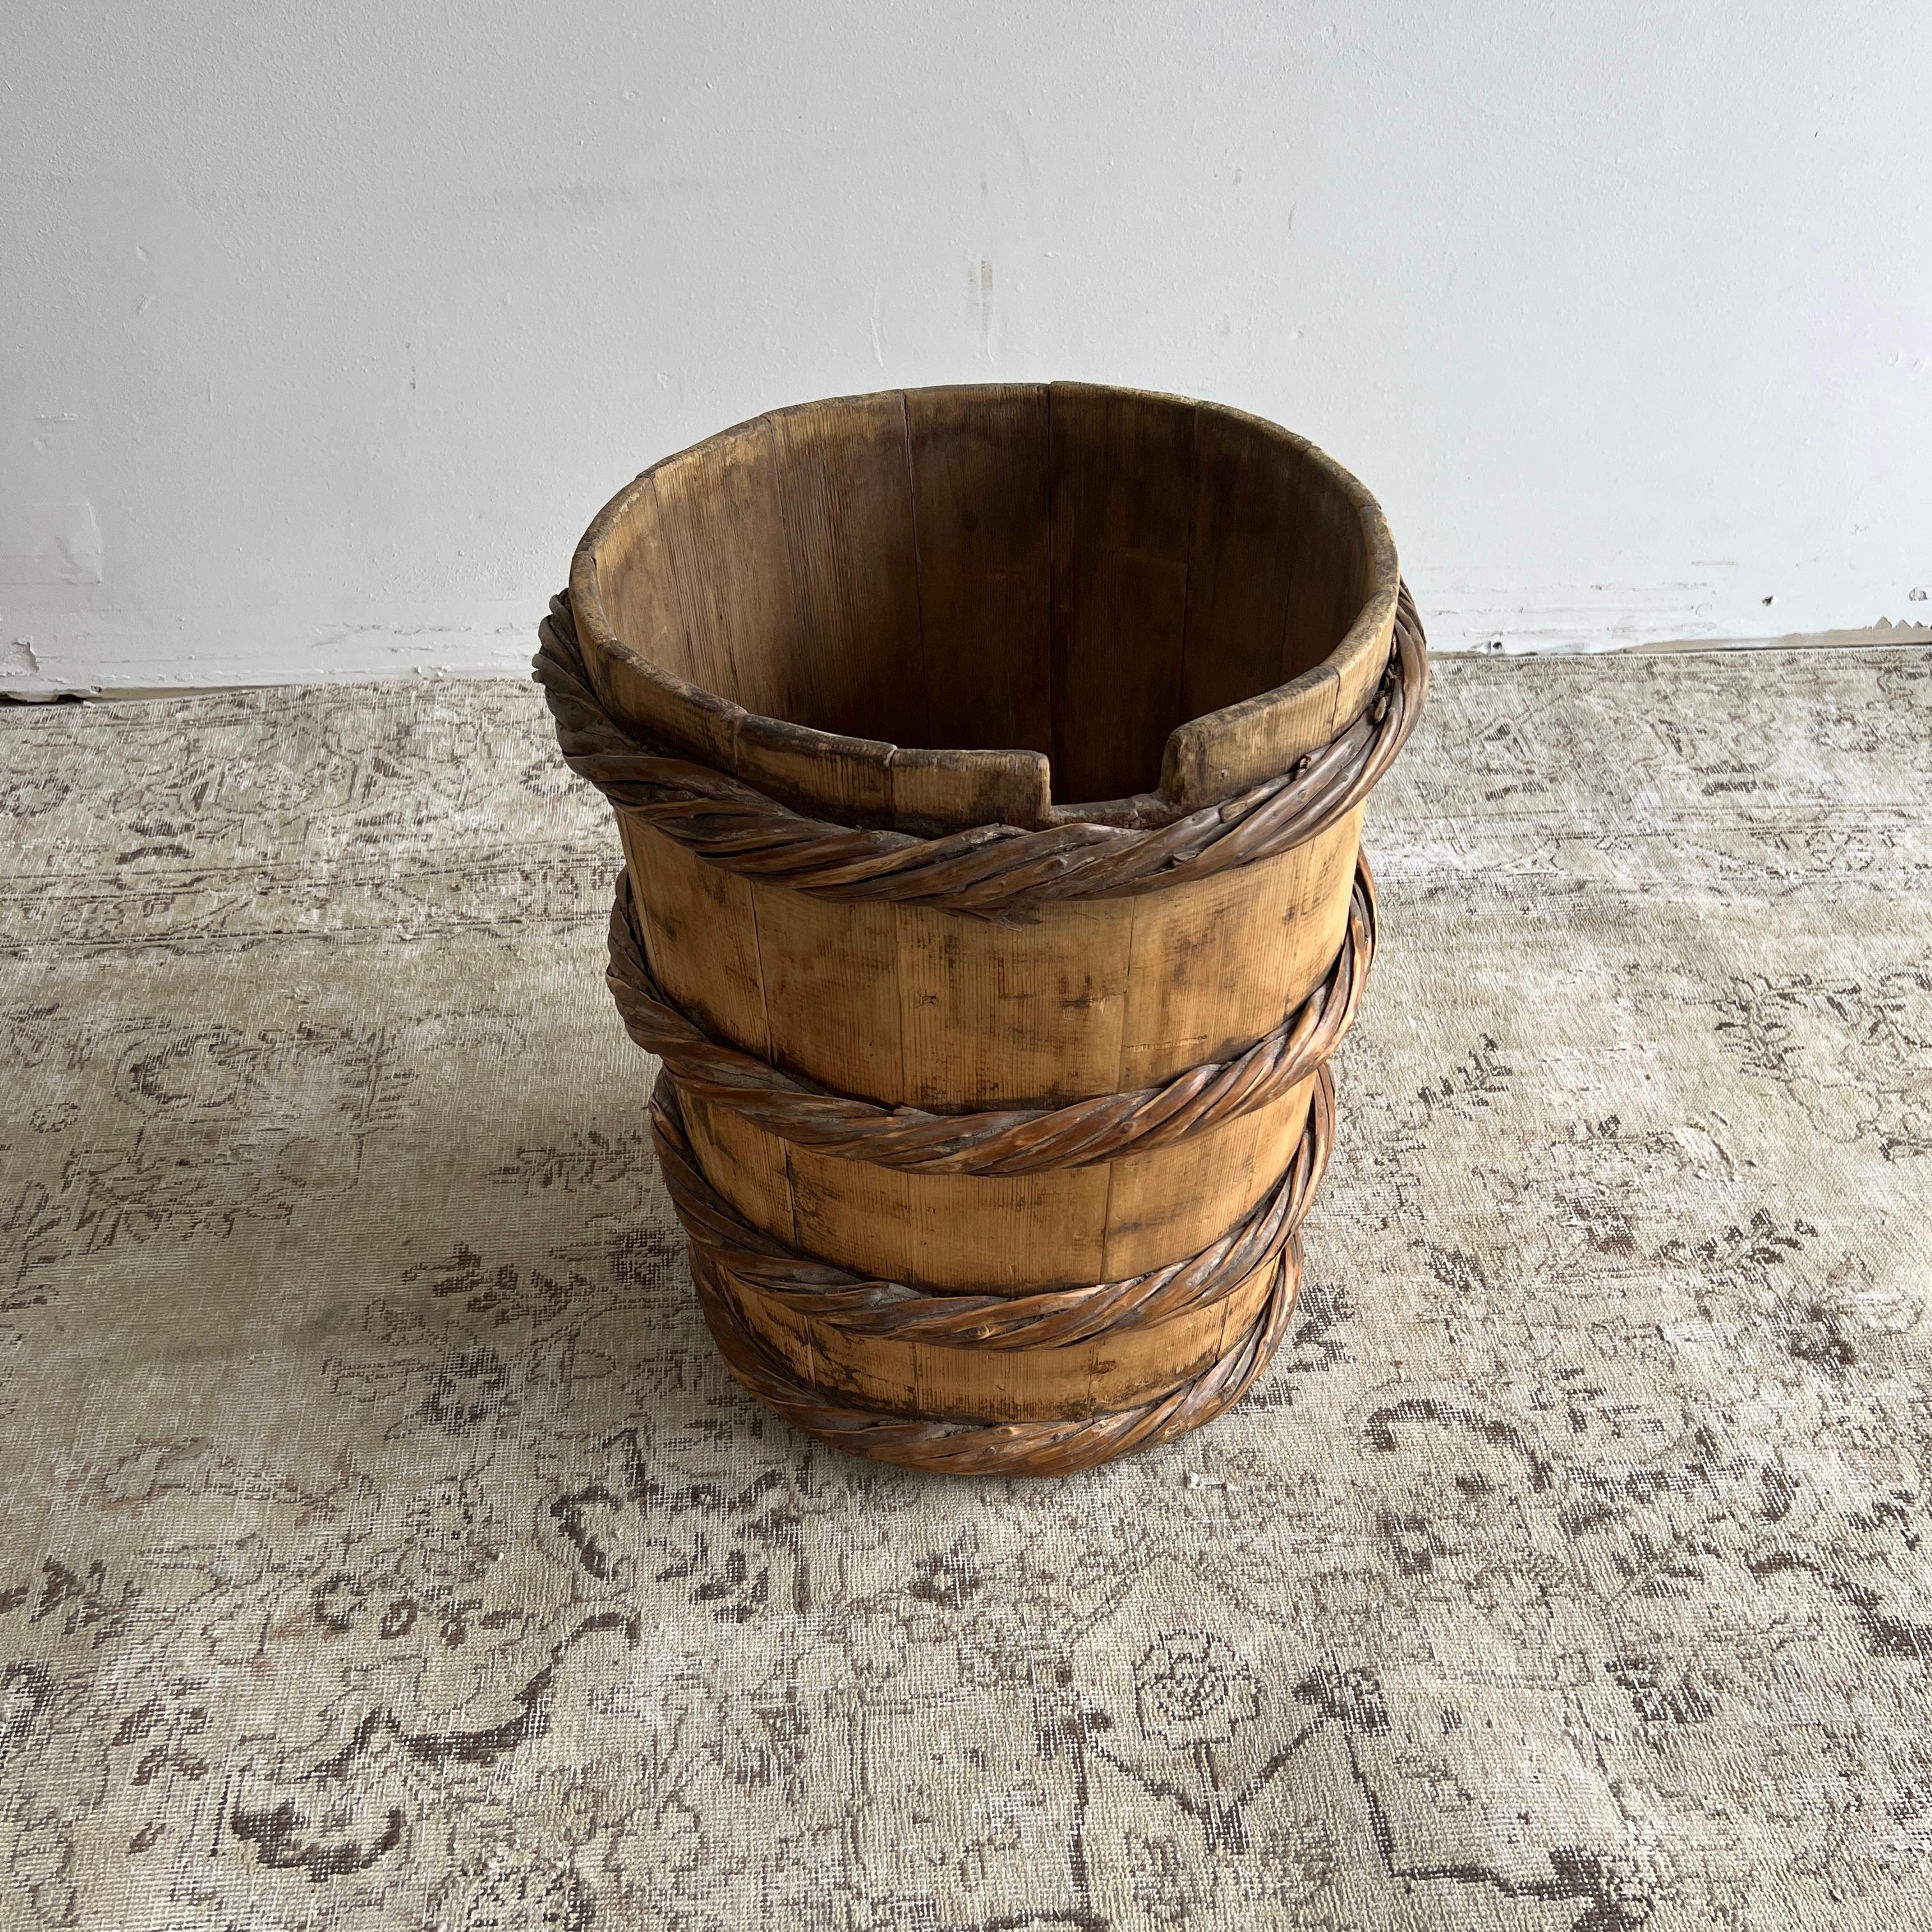 Cypress Wood Planter or Bucket for Plants or Trees 4